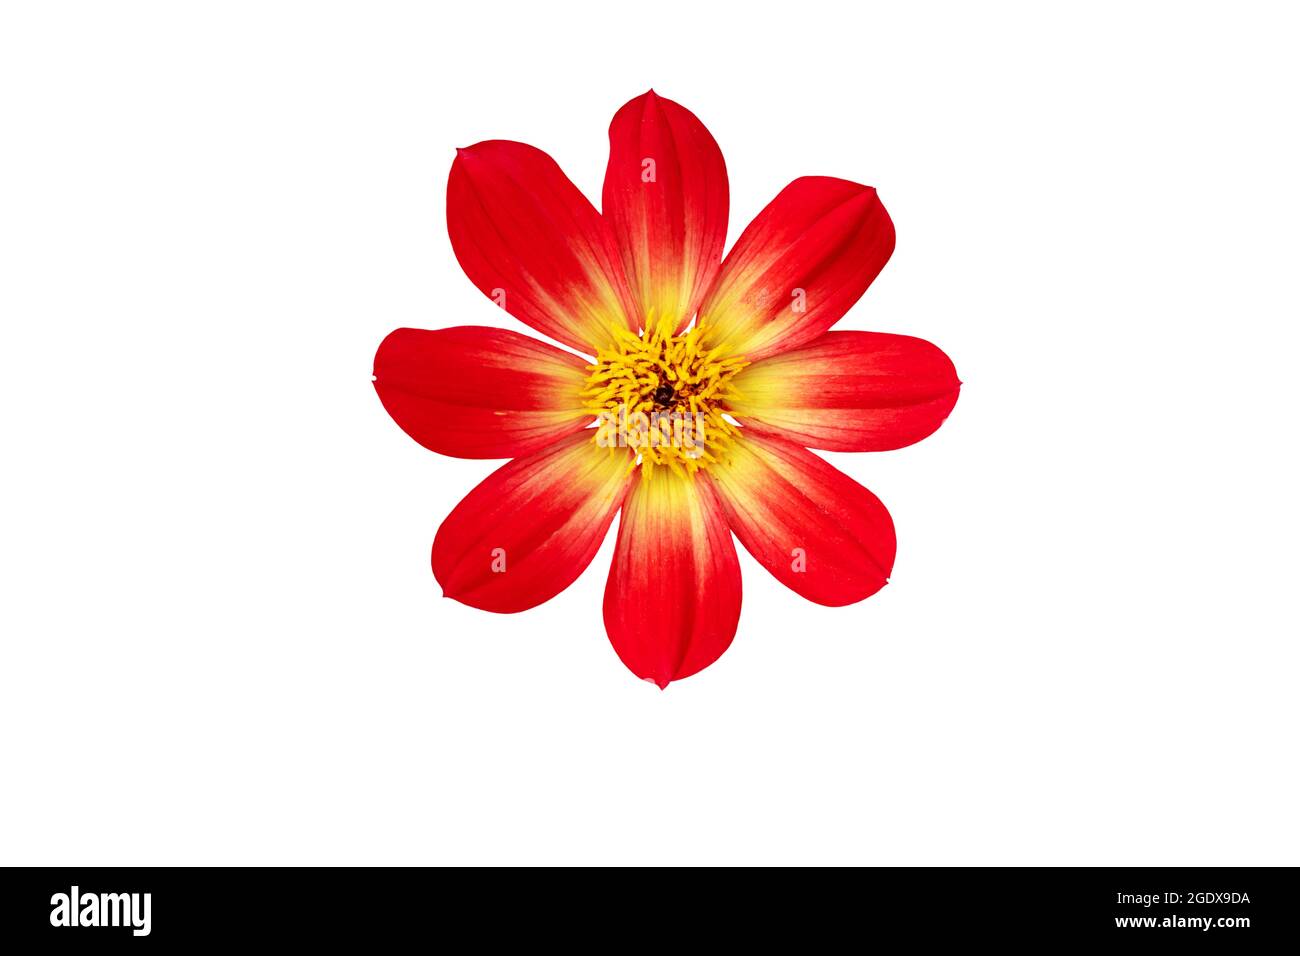 Red dahlia simple flower with eight petals and yellow center isolated on white Stock Photo